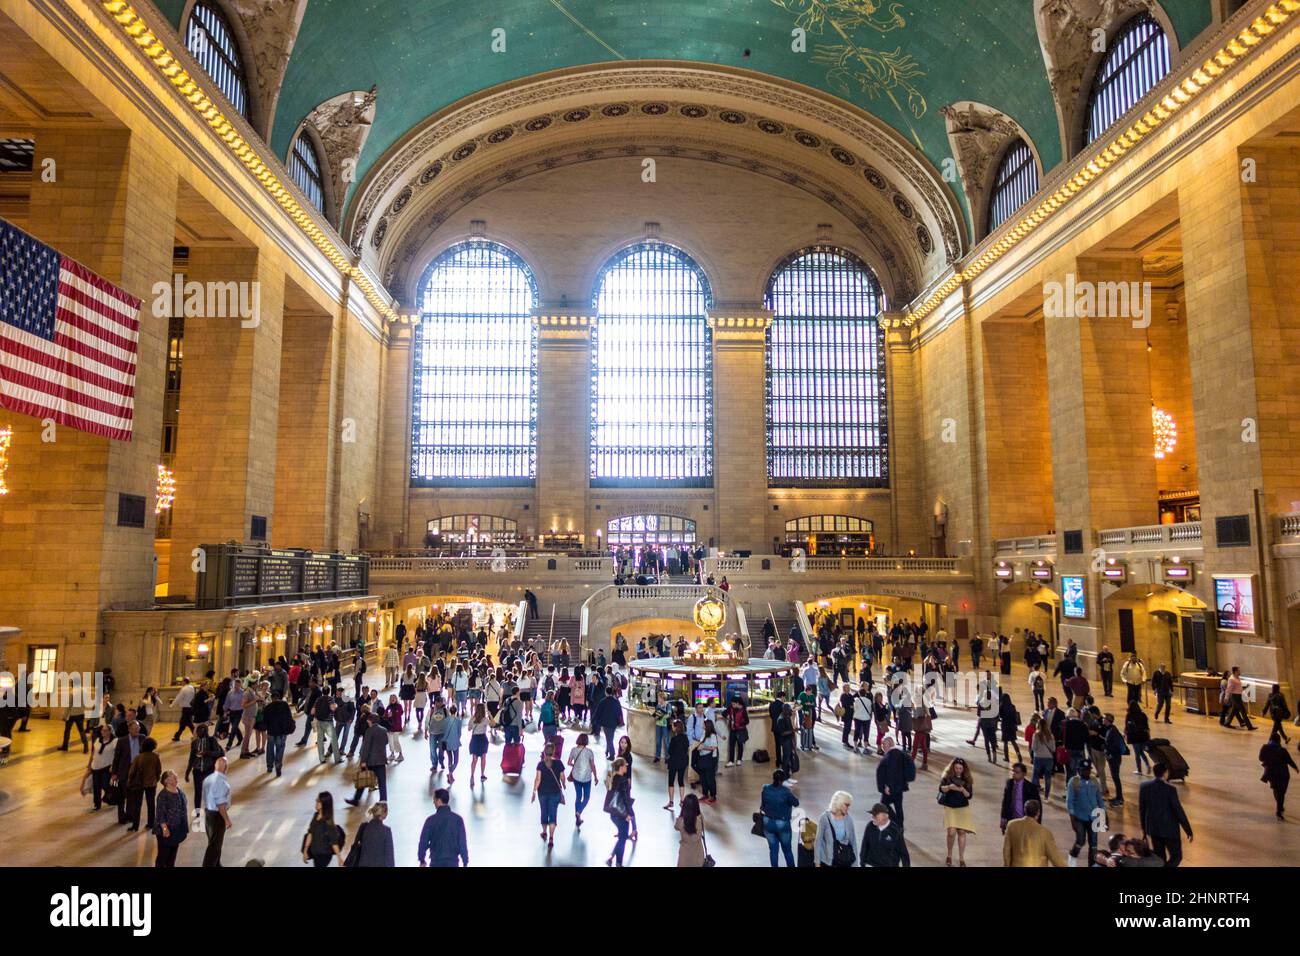 Commuters and tourists in the grand central station in New York Stock Photo